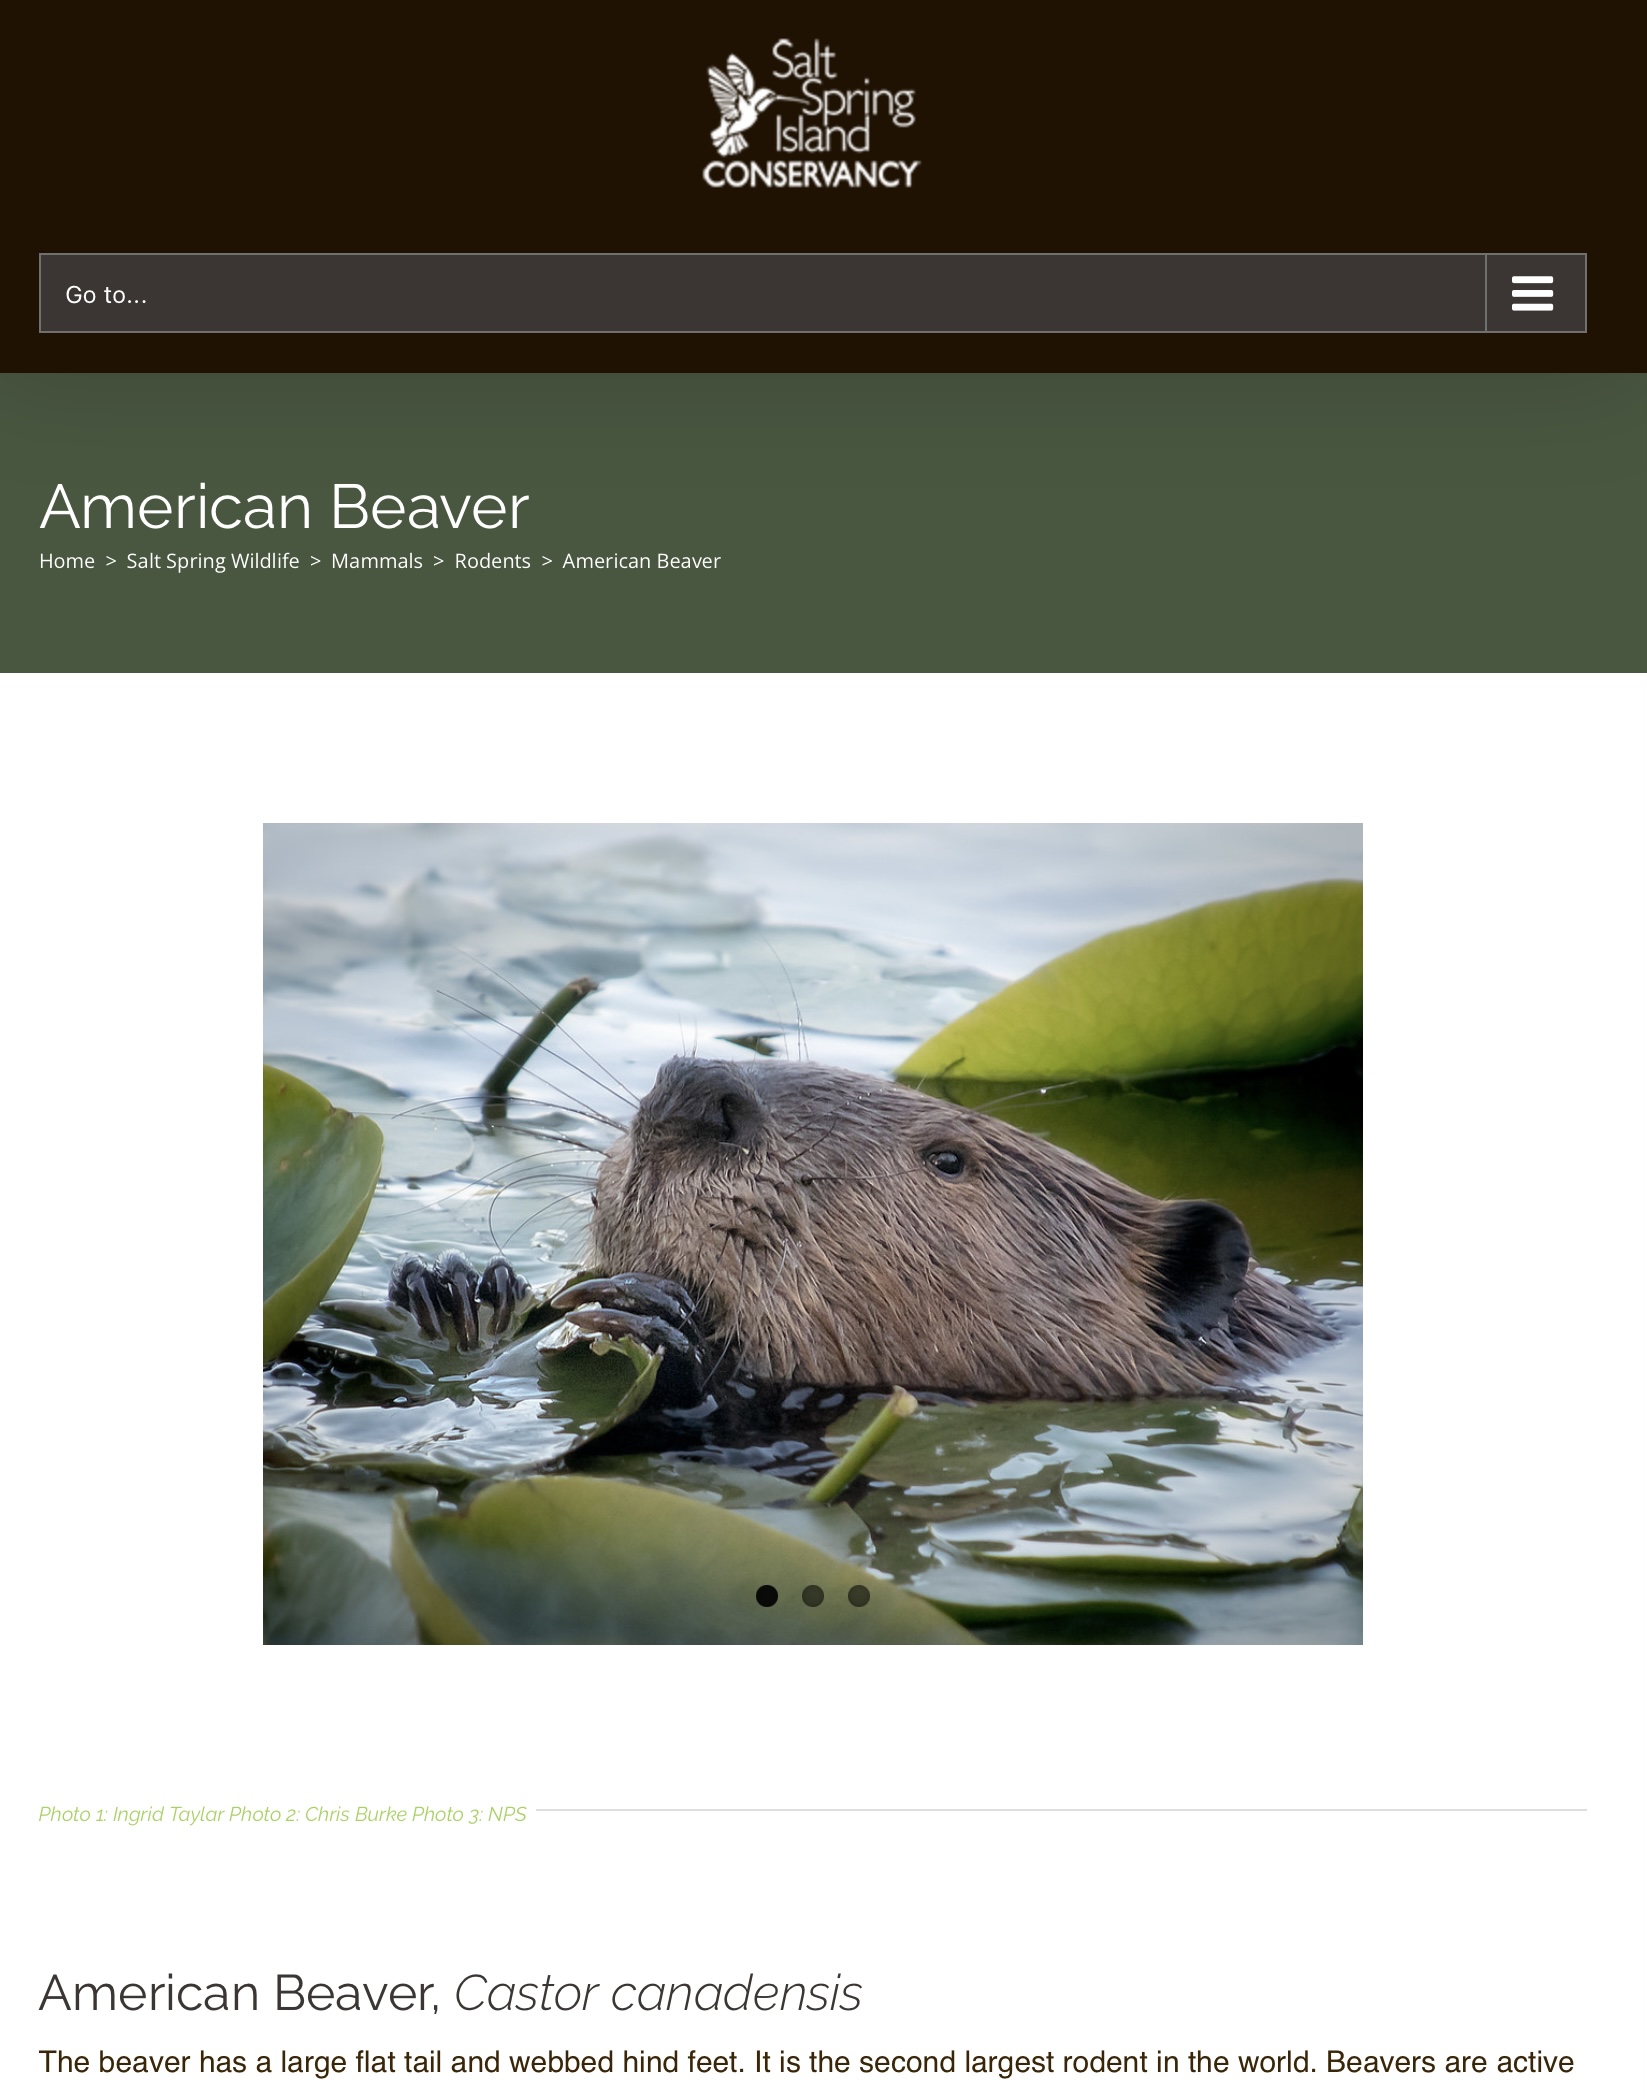 American Beaver eating lily pads